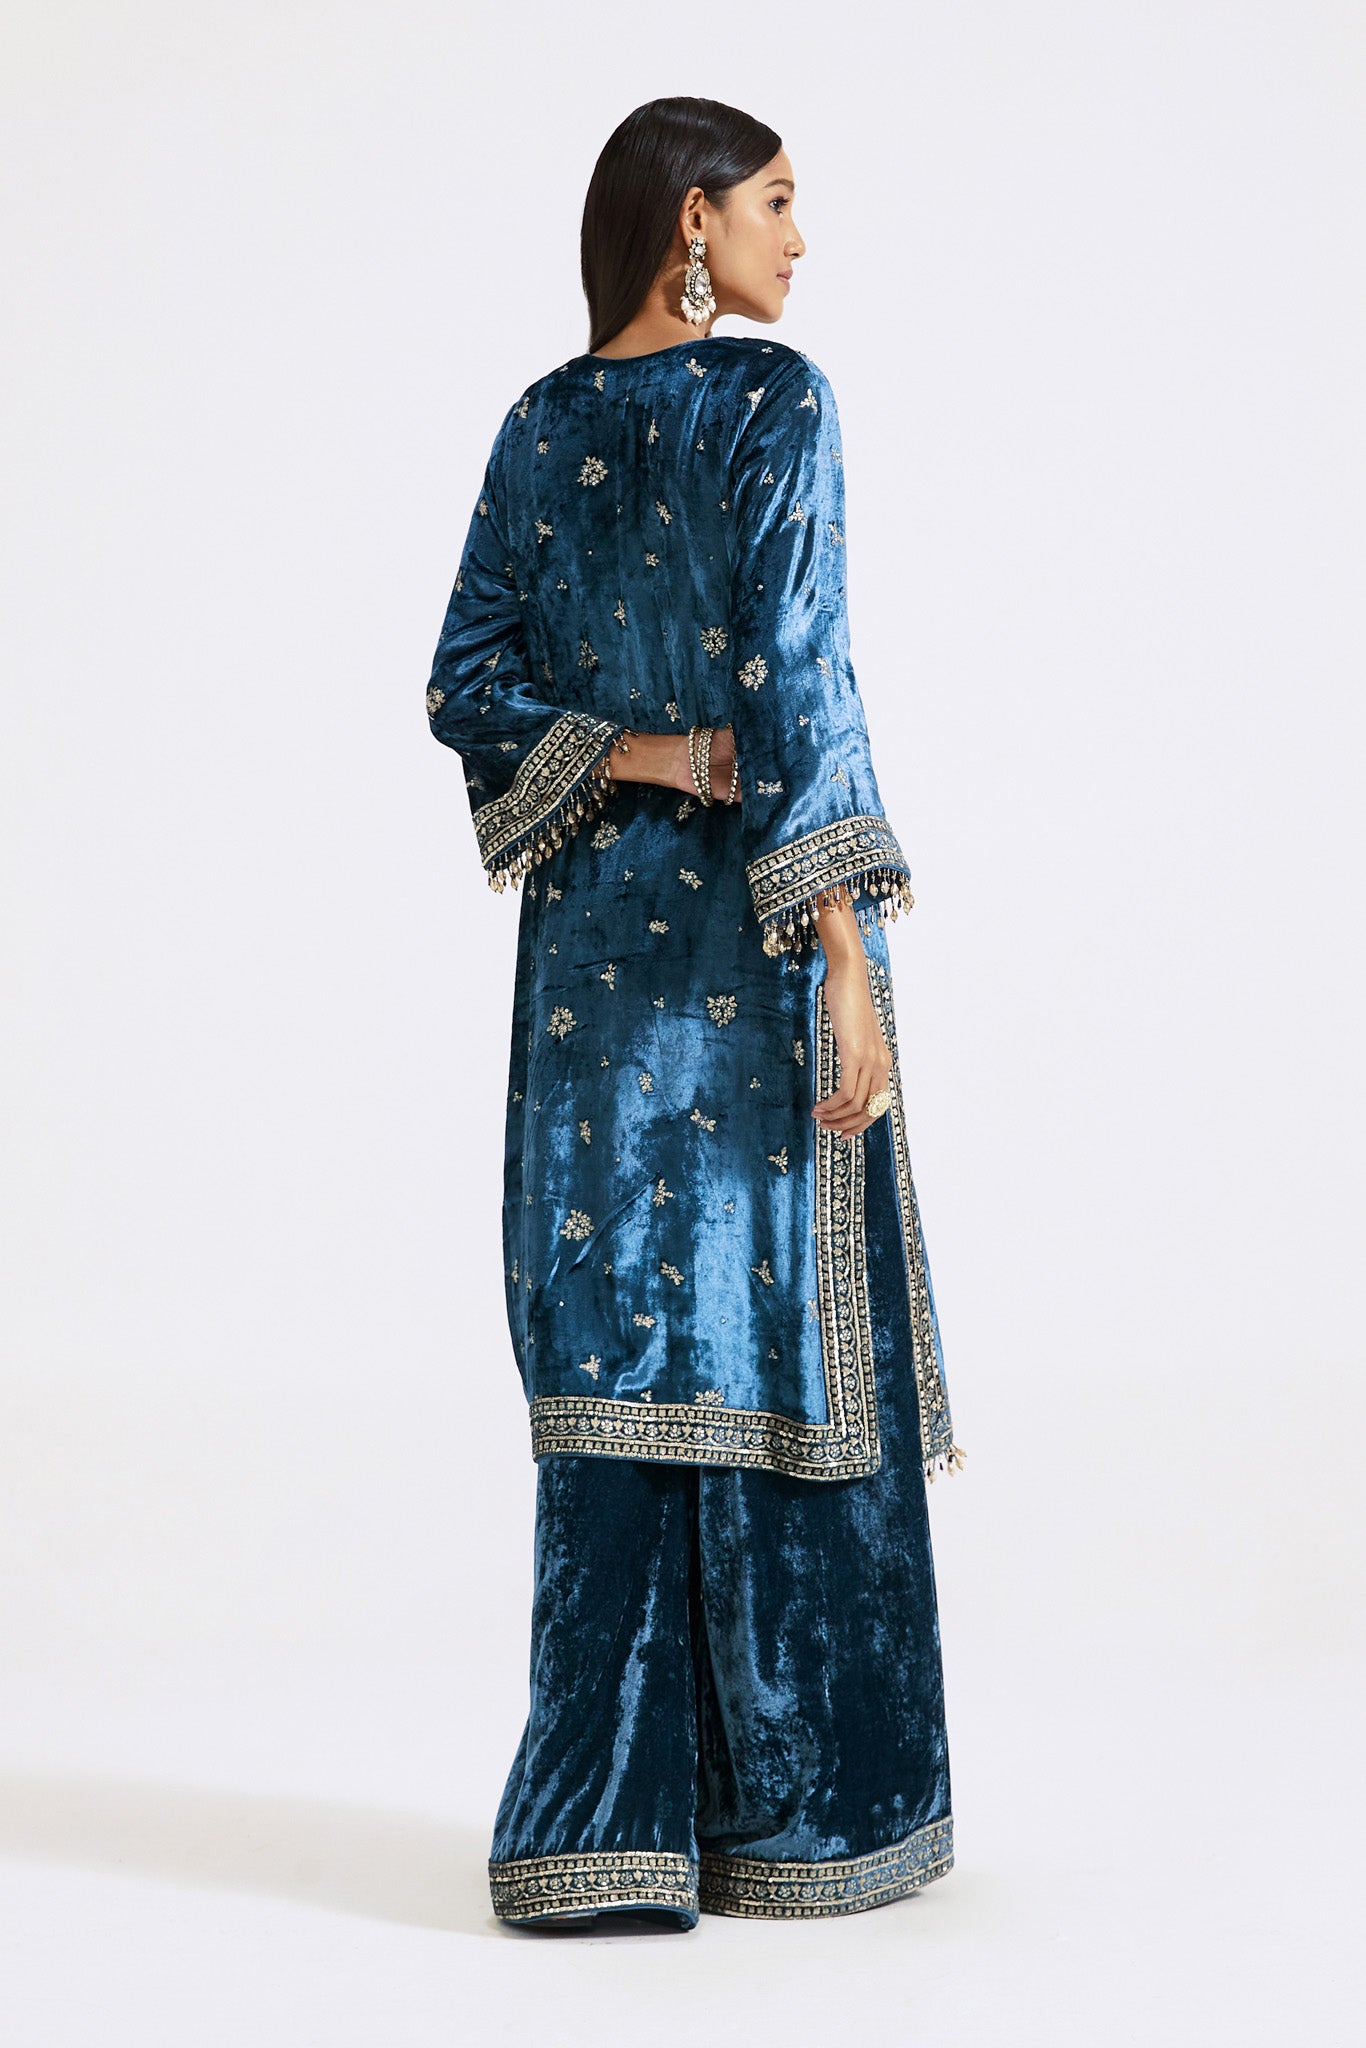 51Z003-RO Blue Velvet Embroidered Sharara Suit with Dupatta